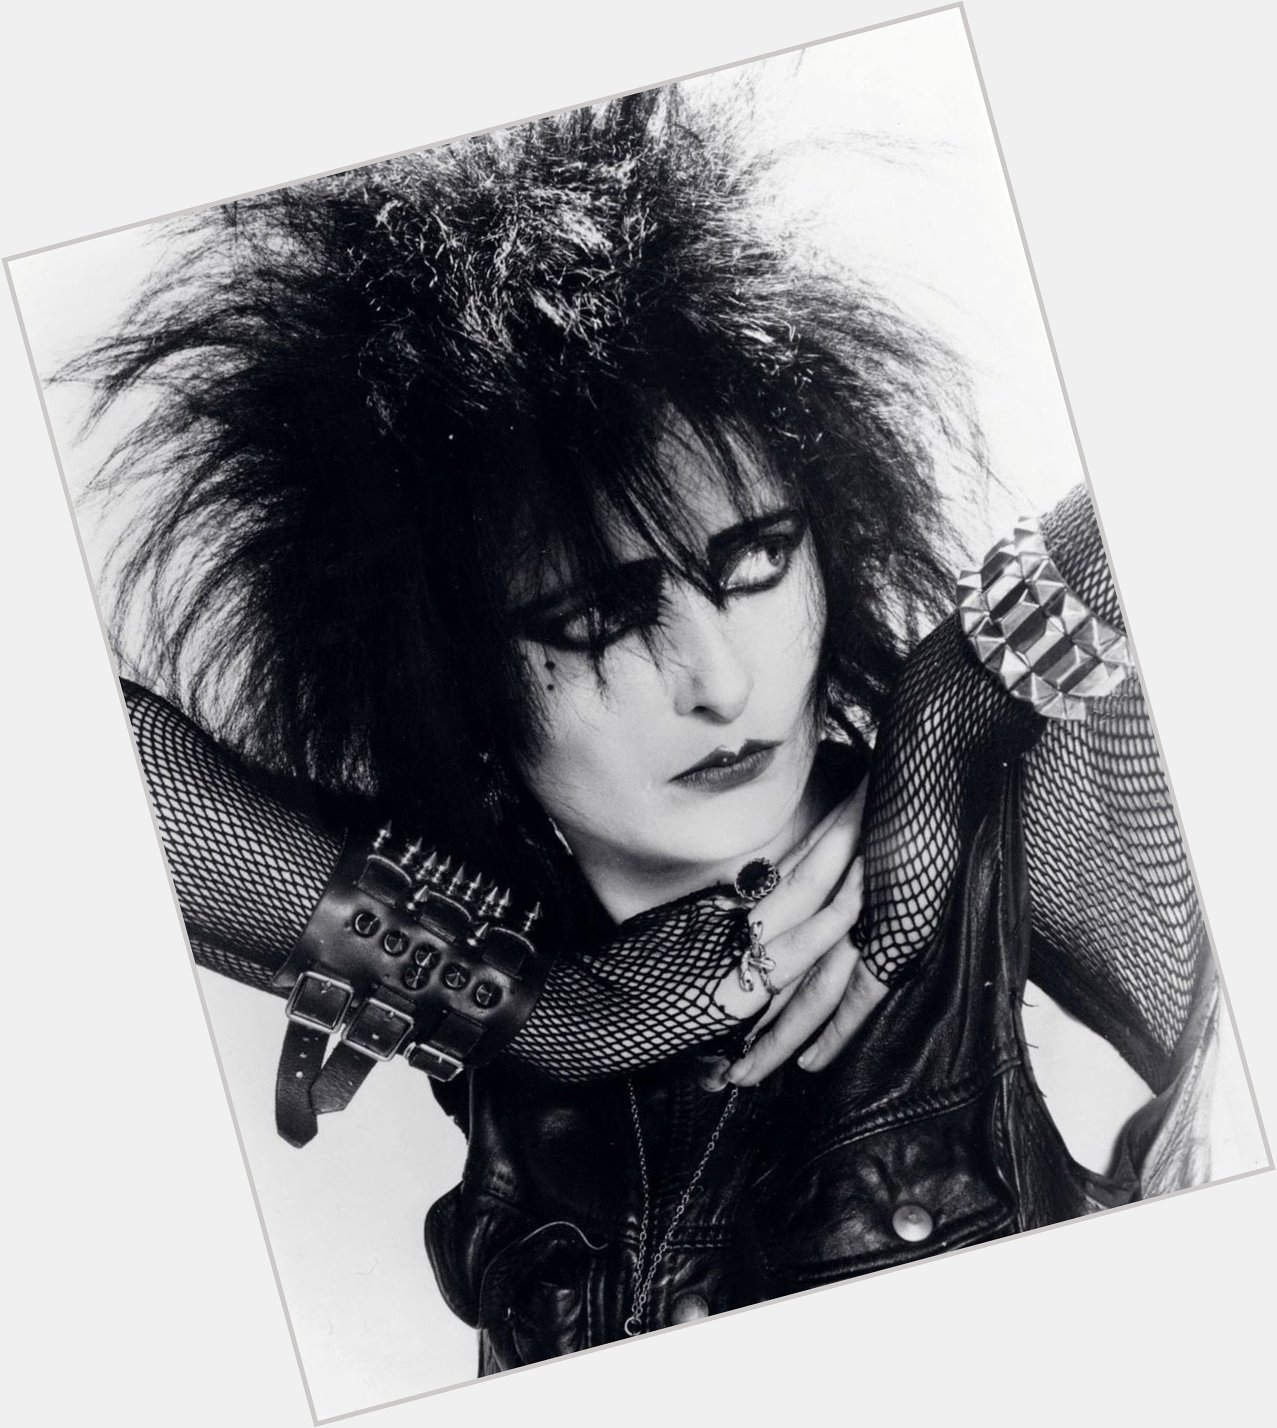 Happy birthday to the perfect music goddess, Siouxsie Sioux.  Cities in Dust is guaranteed to make me dance. 